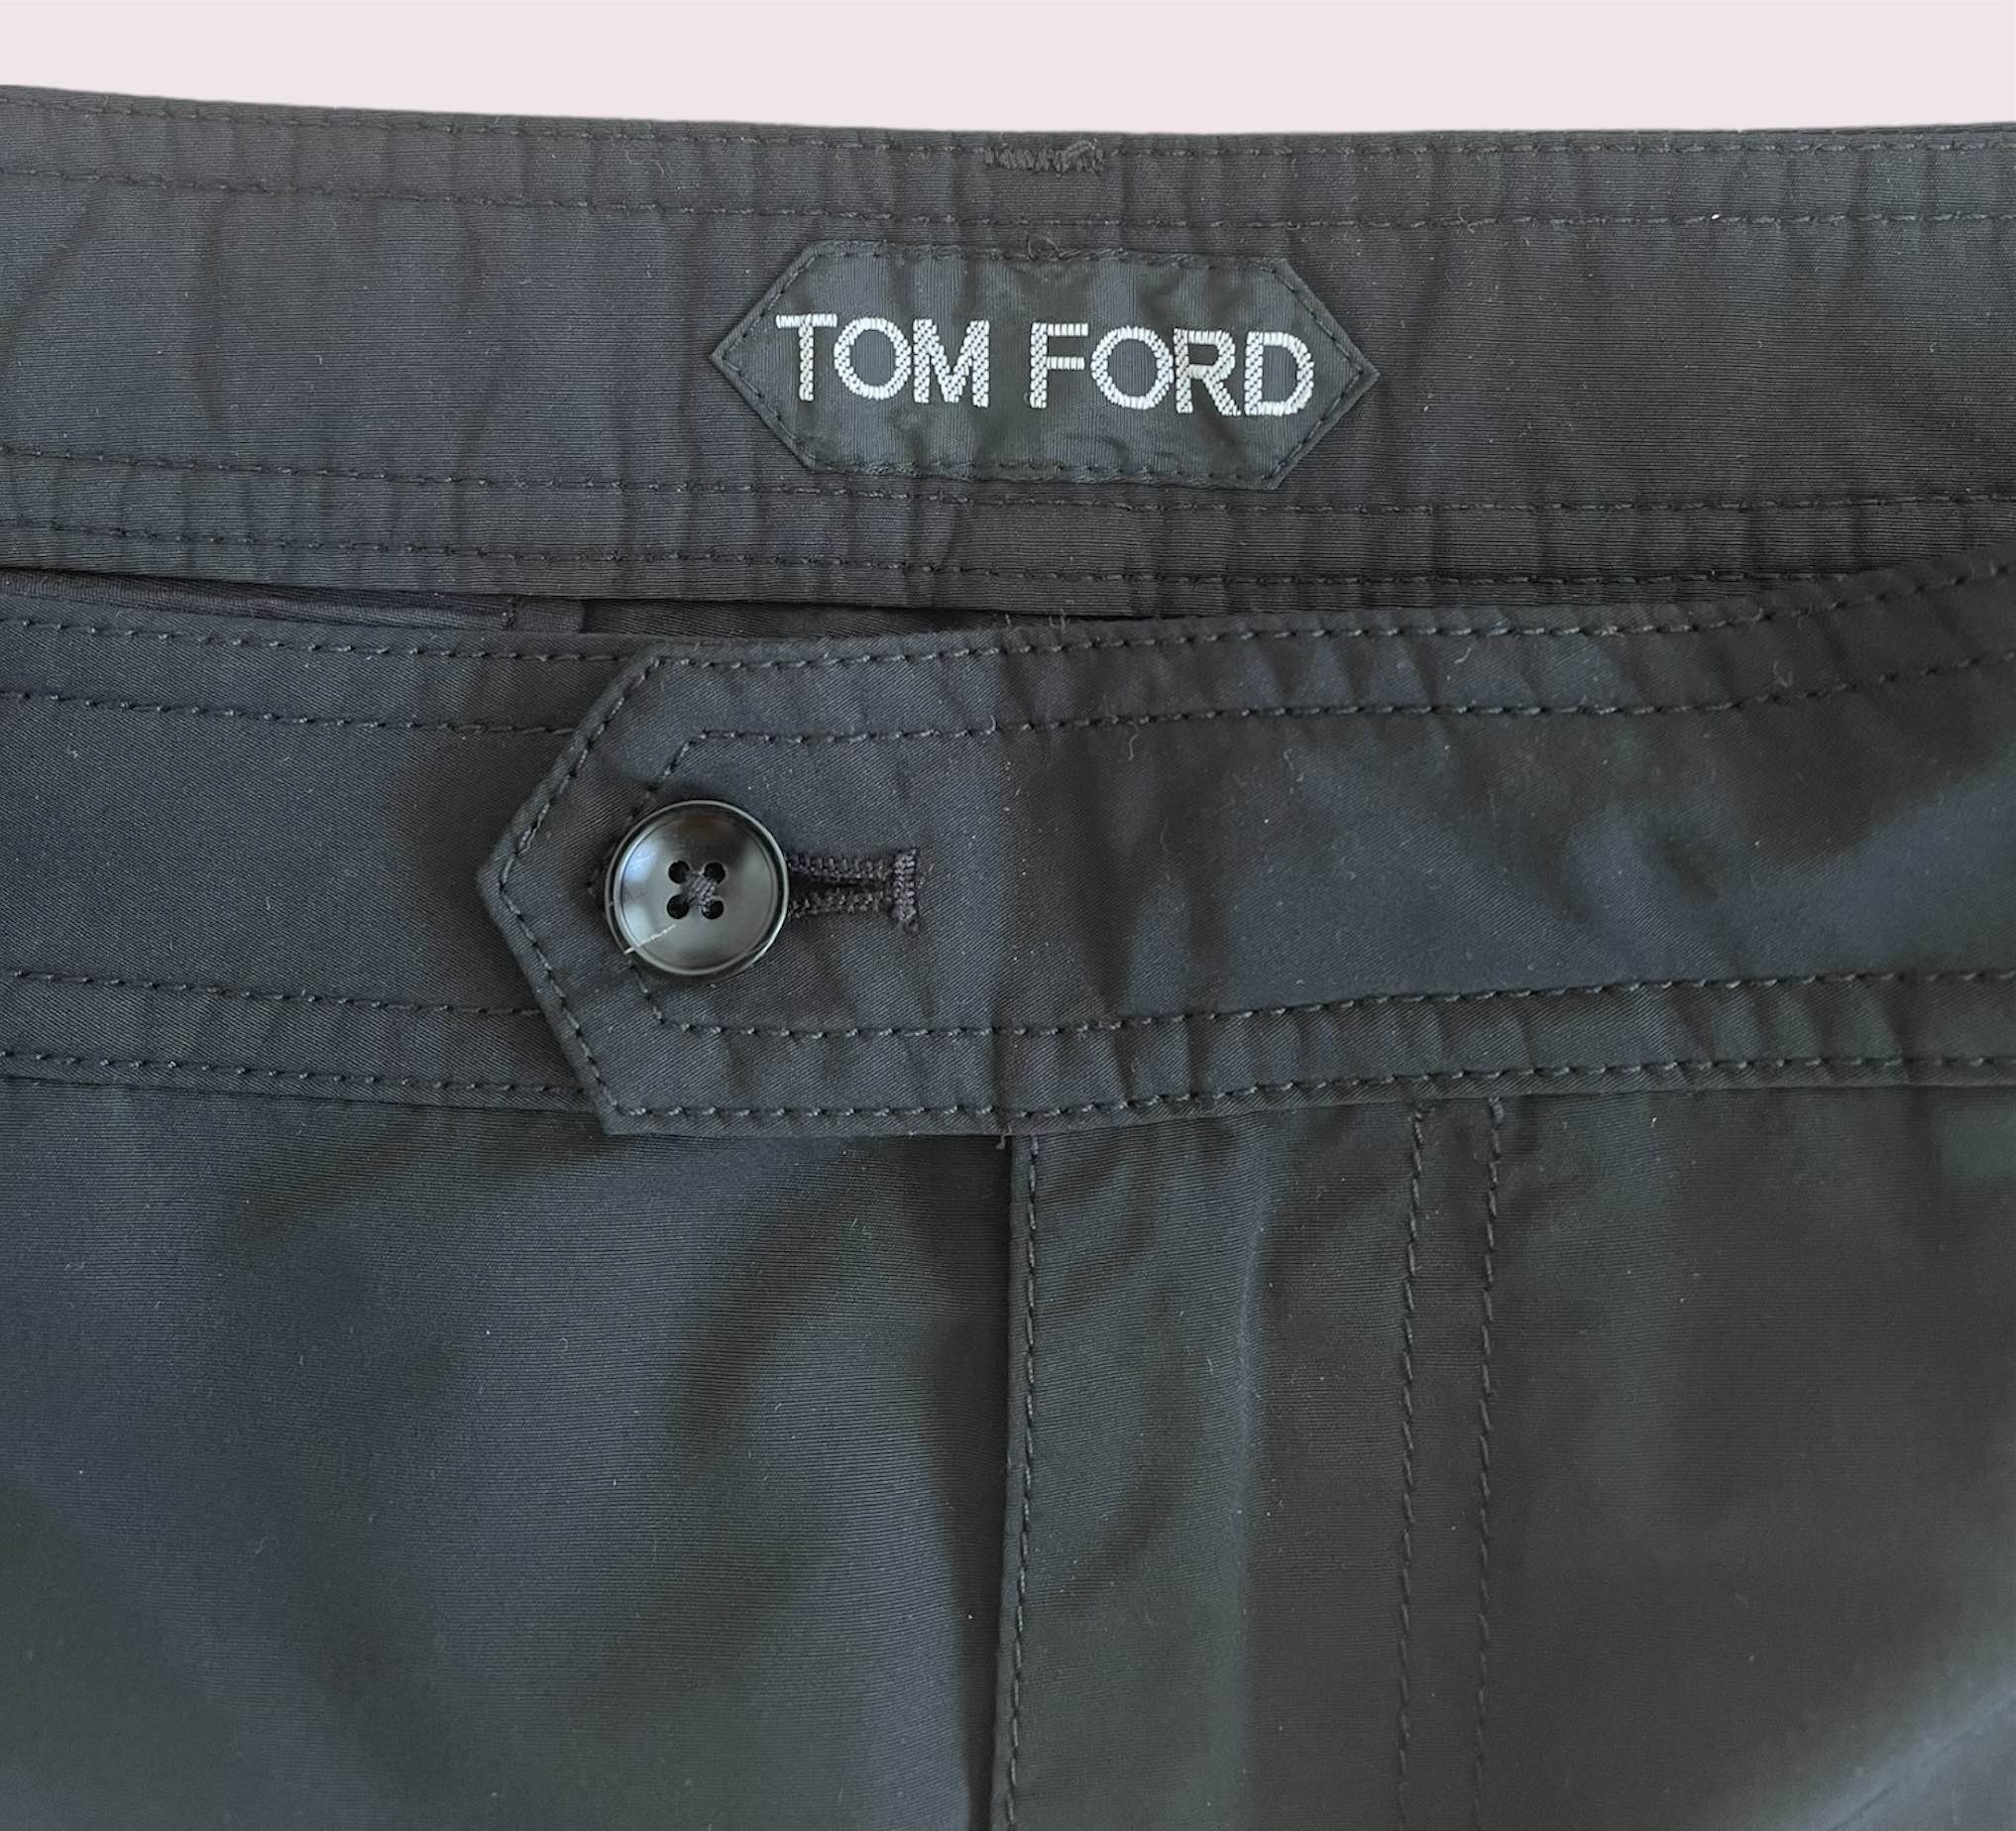 Tom Ford Shorts (New With Tags) - 3